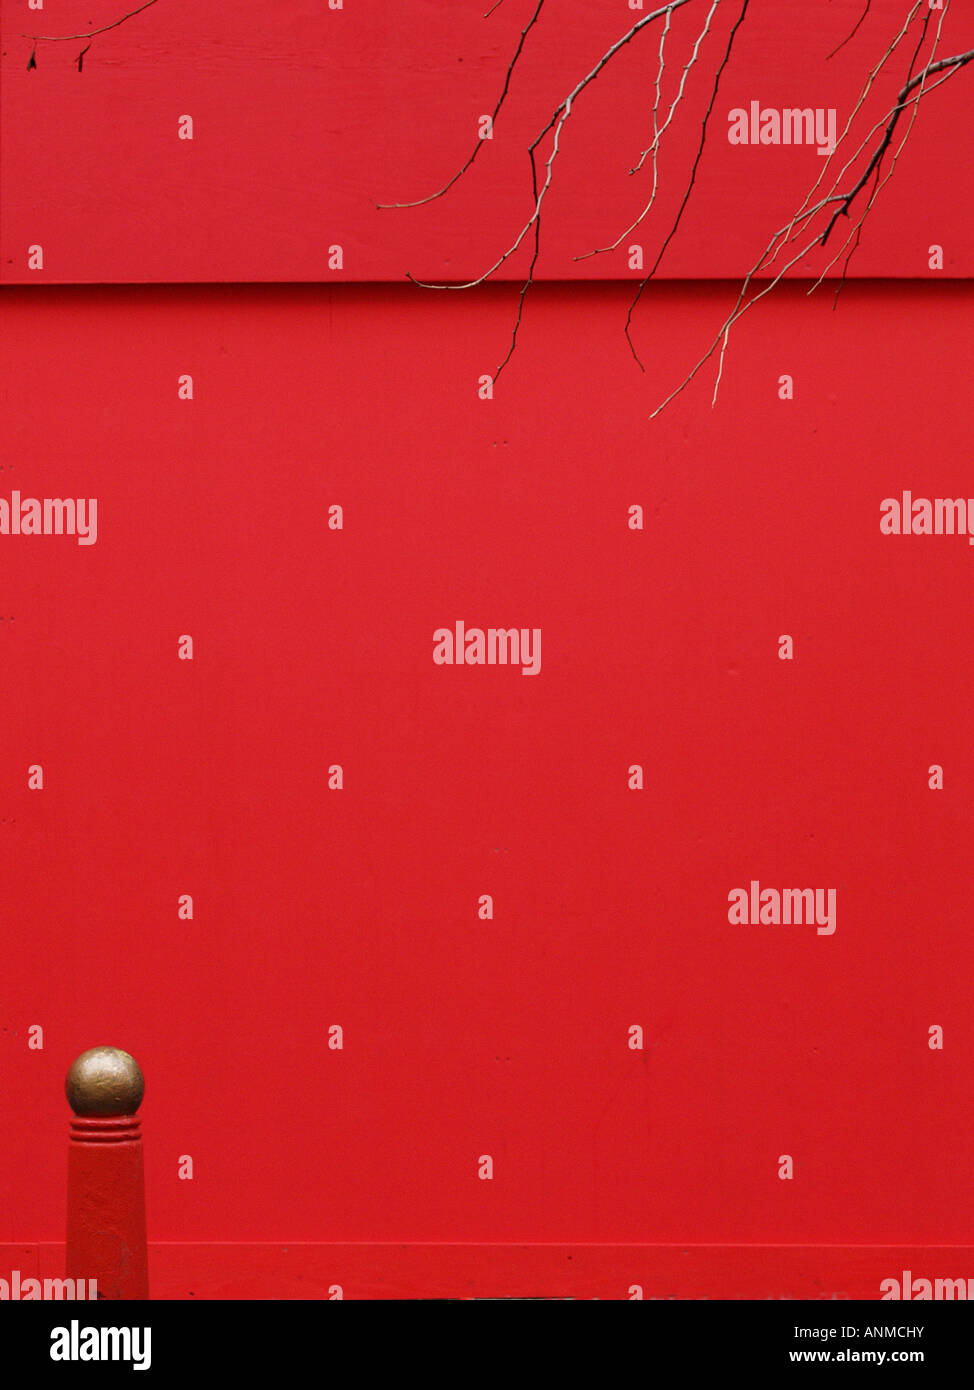 Minimalistic picture of golden globe on a red post against a red wall with branches overhanging, in Chinatown London Stock Photo